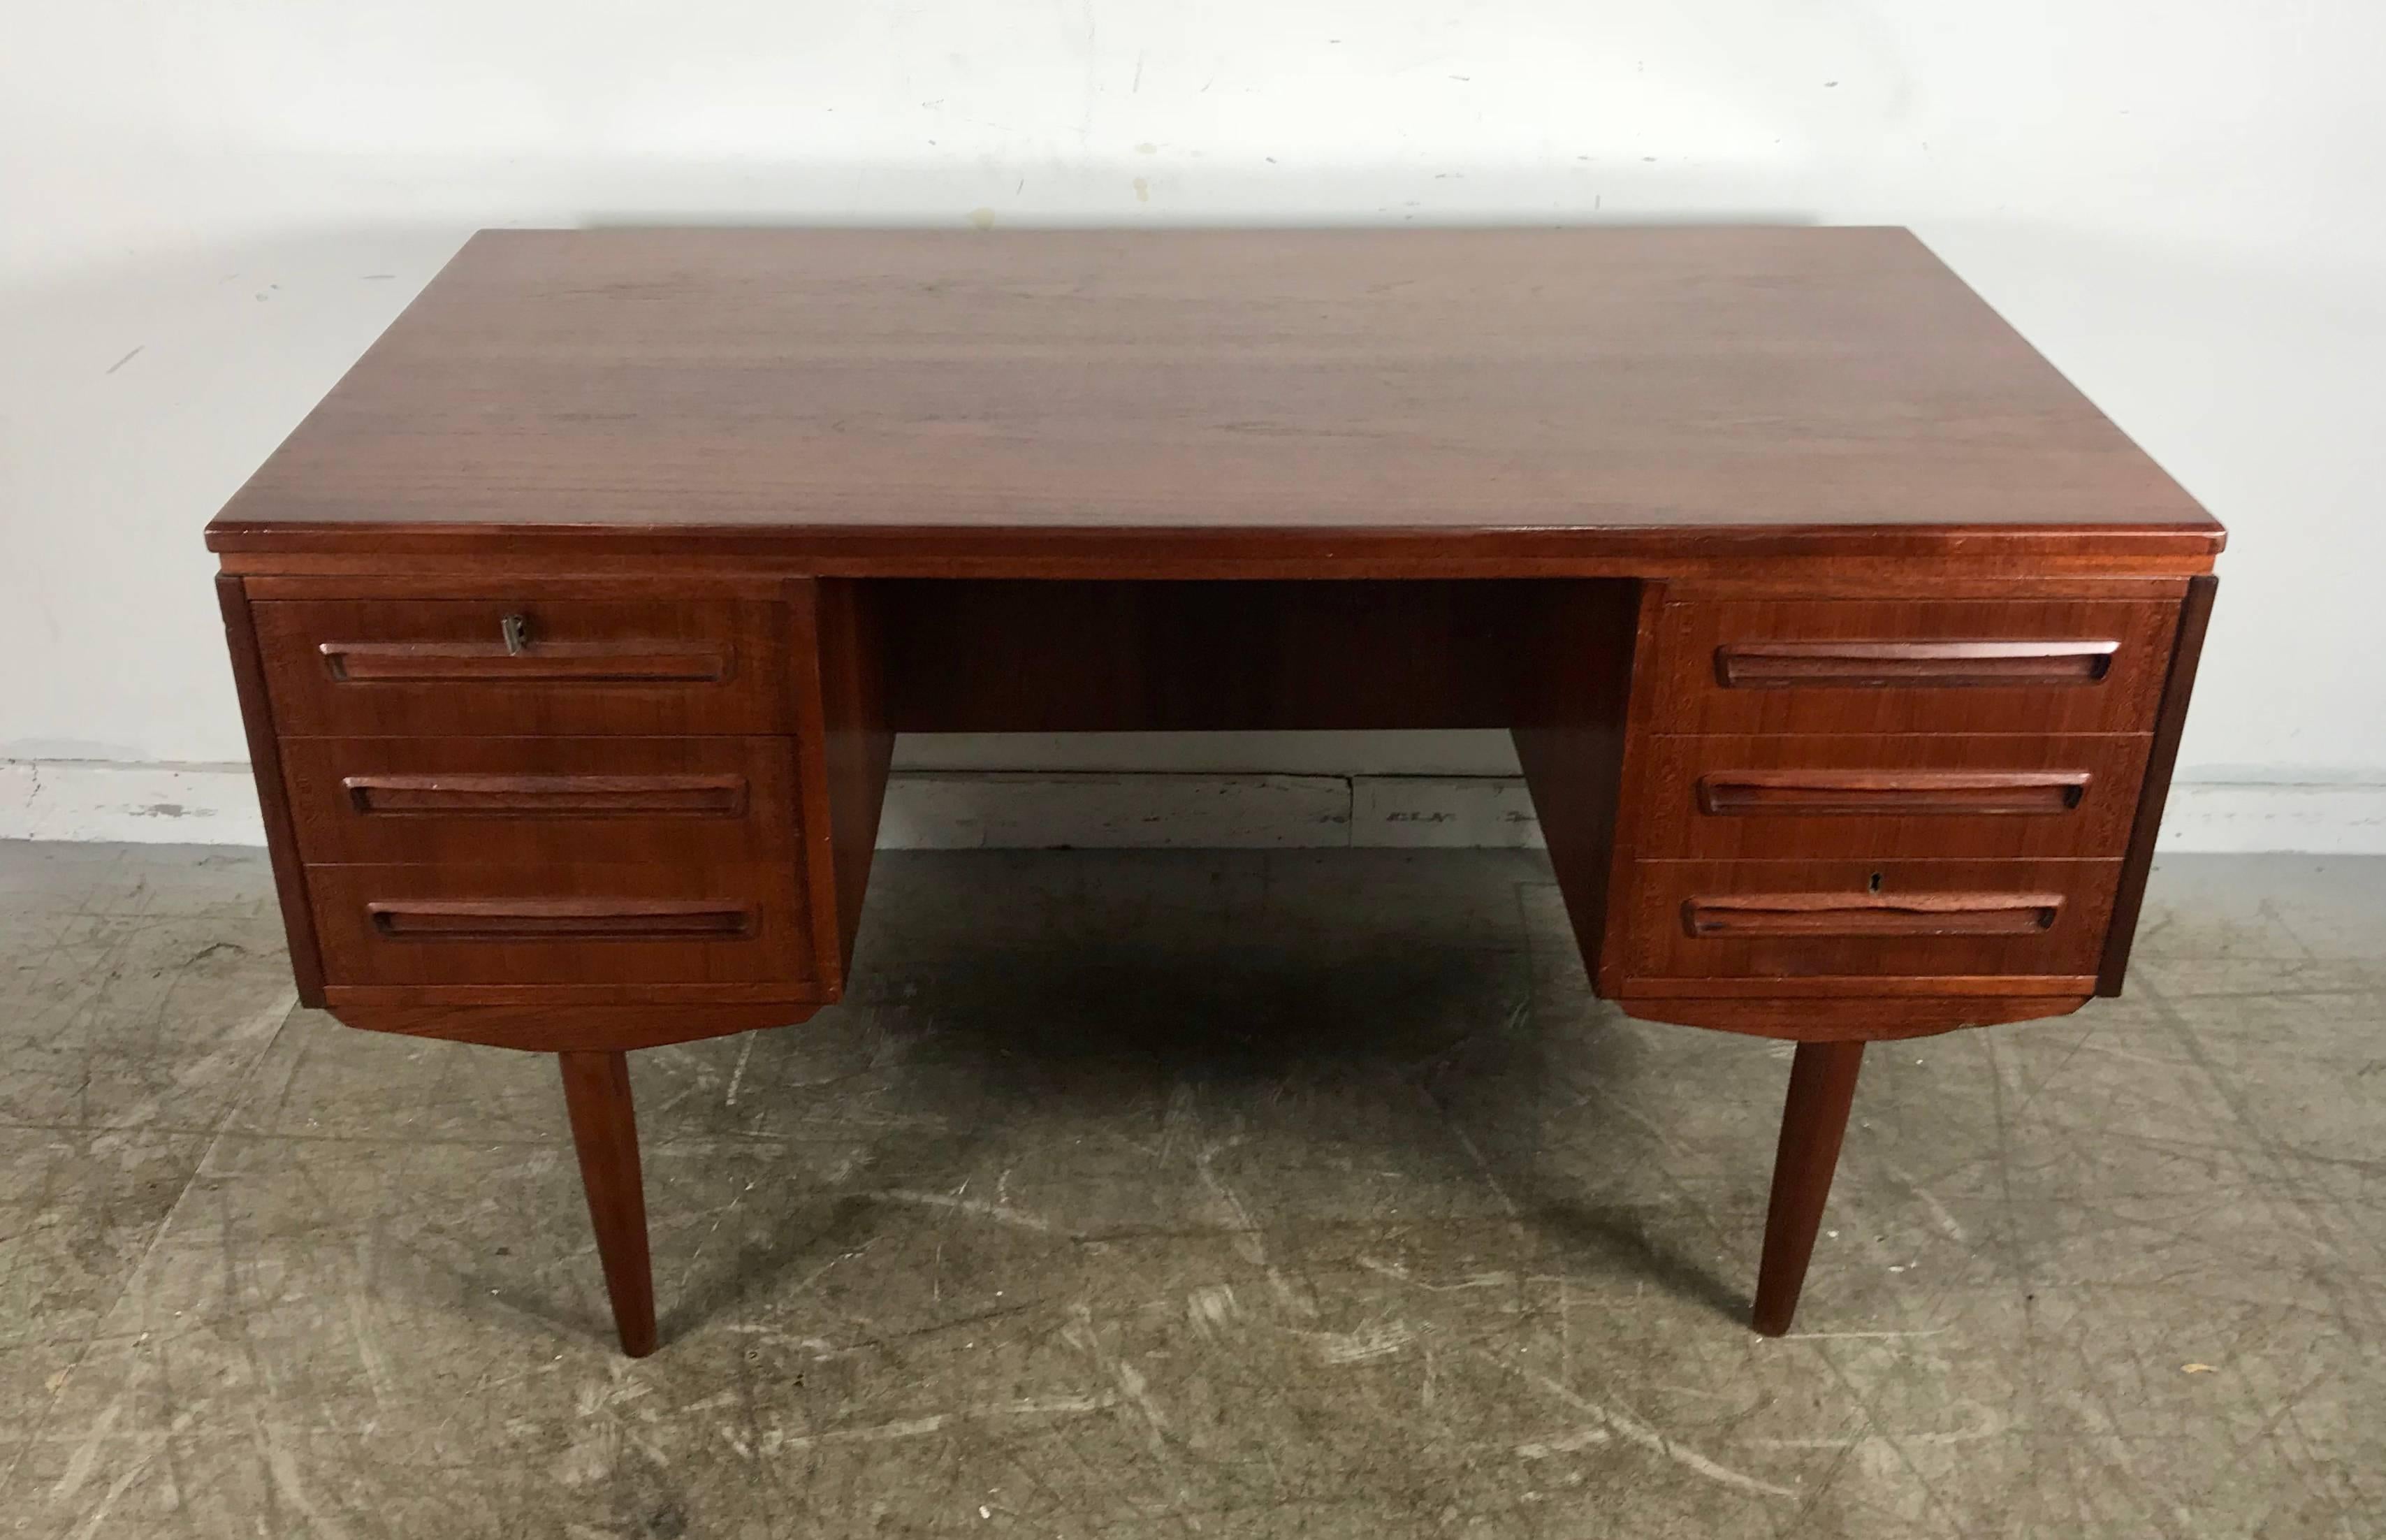 Unusual six-drawer Danish desk with front storage cubby by Gunni Omann, top left drawer locks, retains original key, superior quality and construction, unusual drop down door (bar) feature to front of desk, hand delivery avail to New York City or